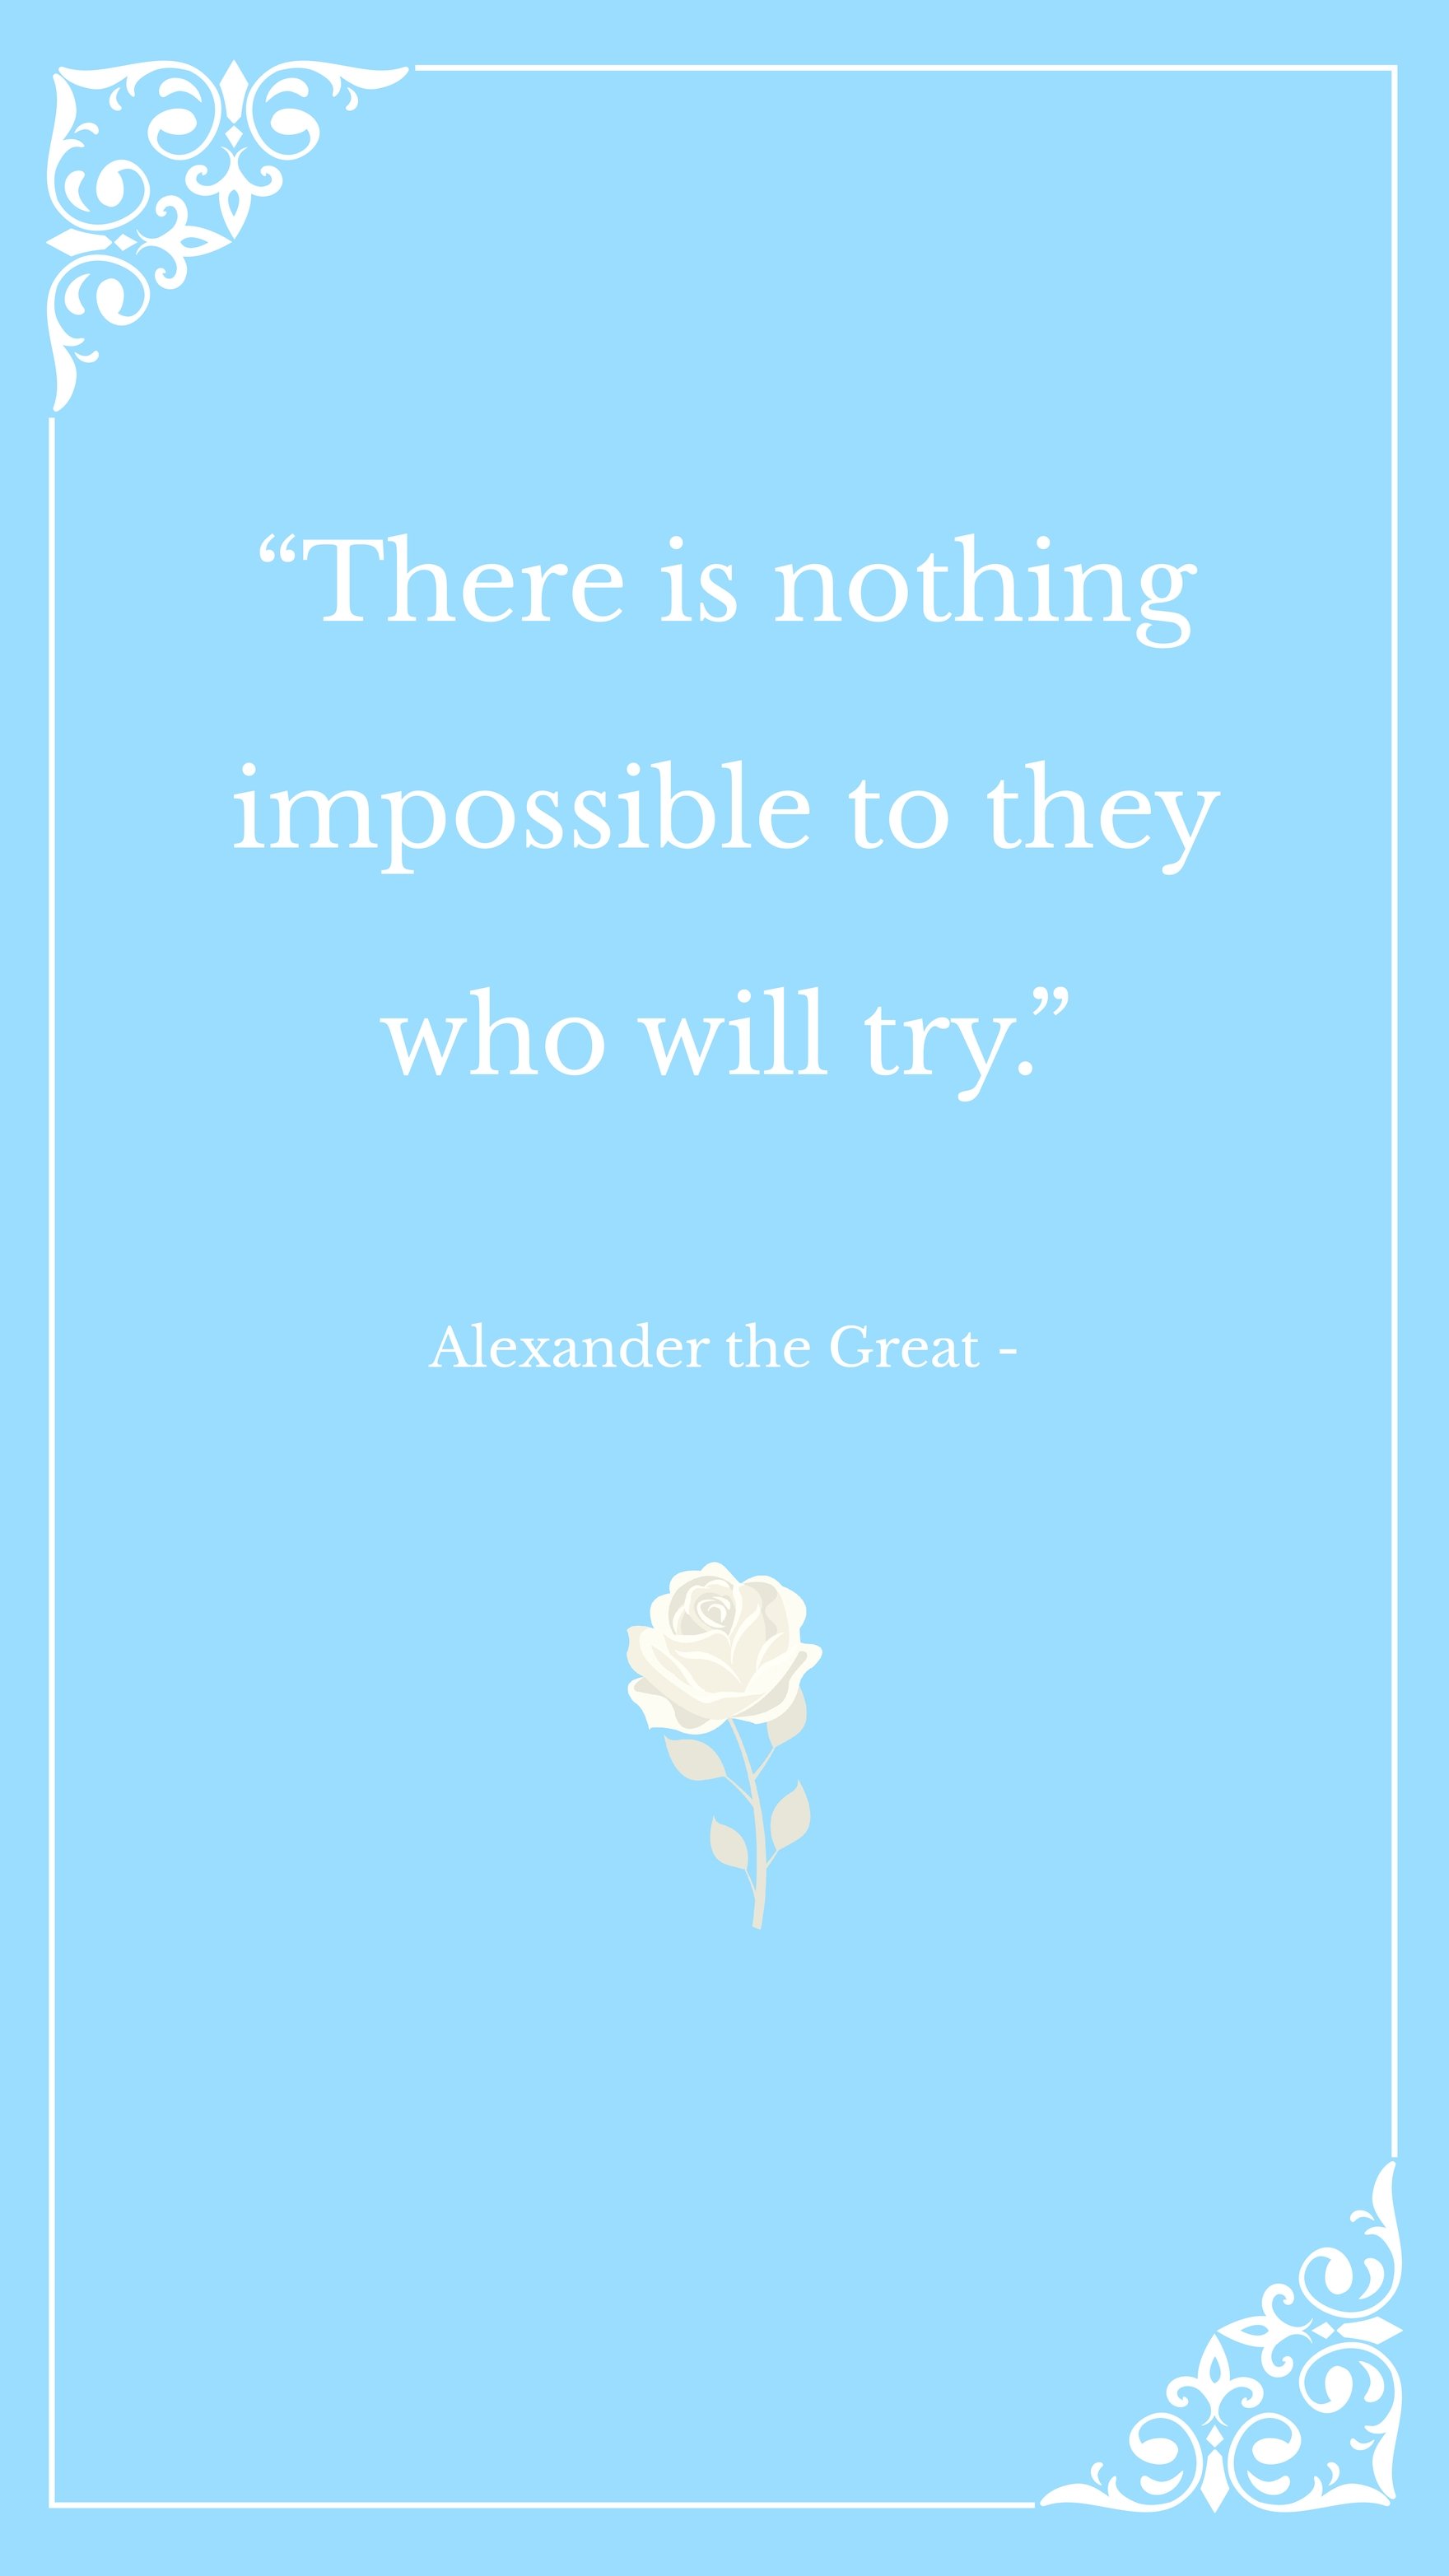 Alexander the Great - There is nothing impossible to they who will try. Template